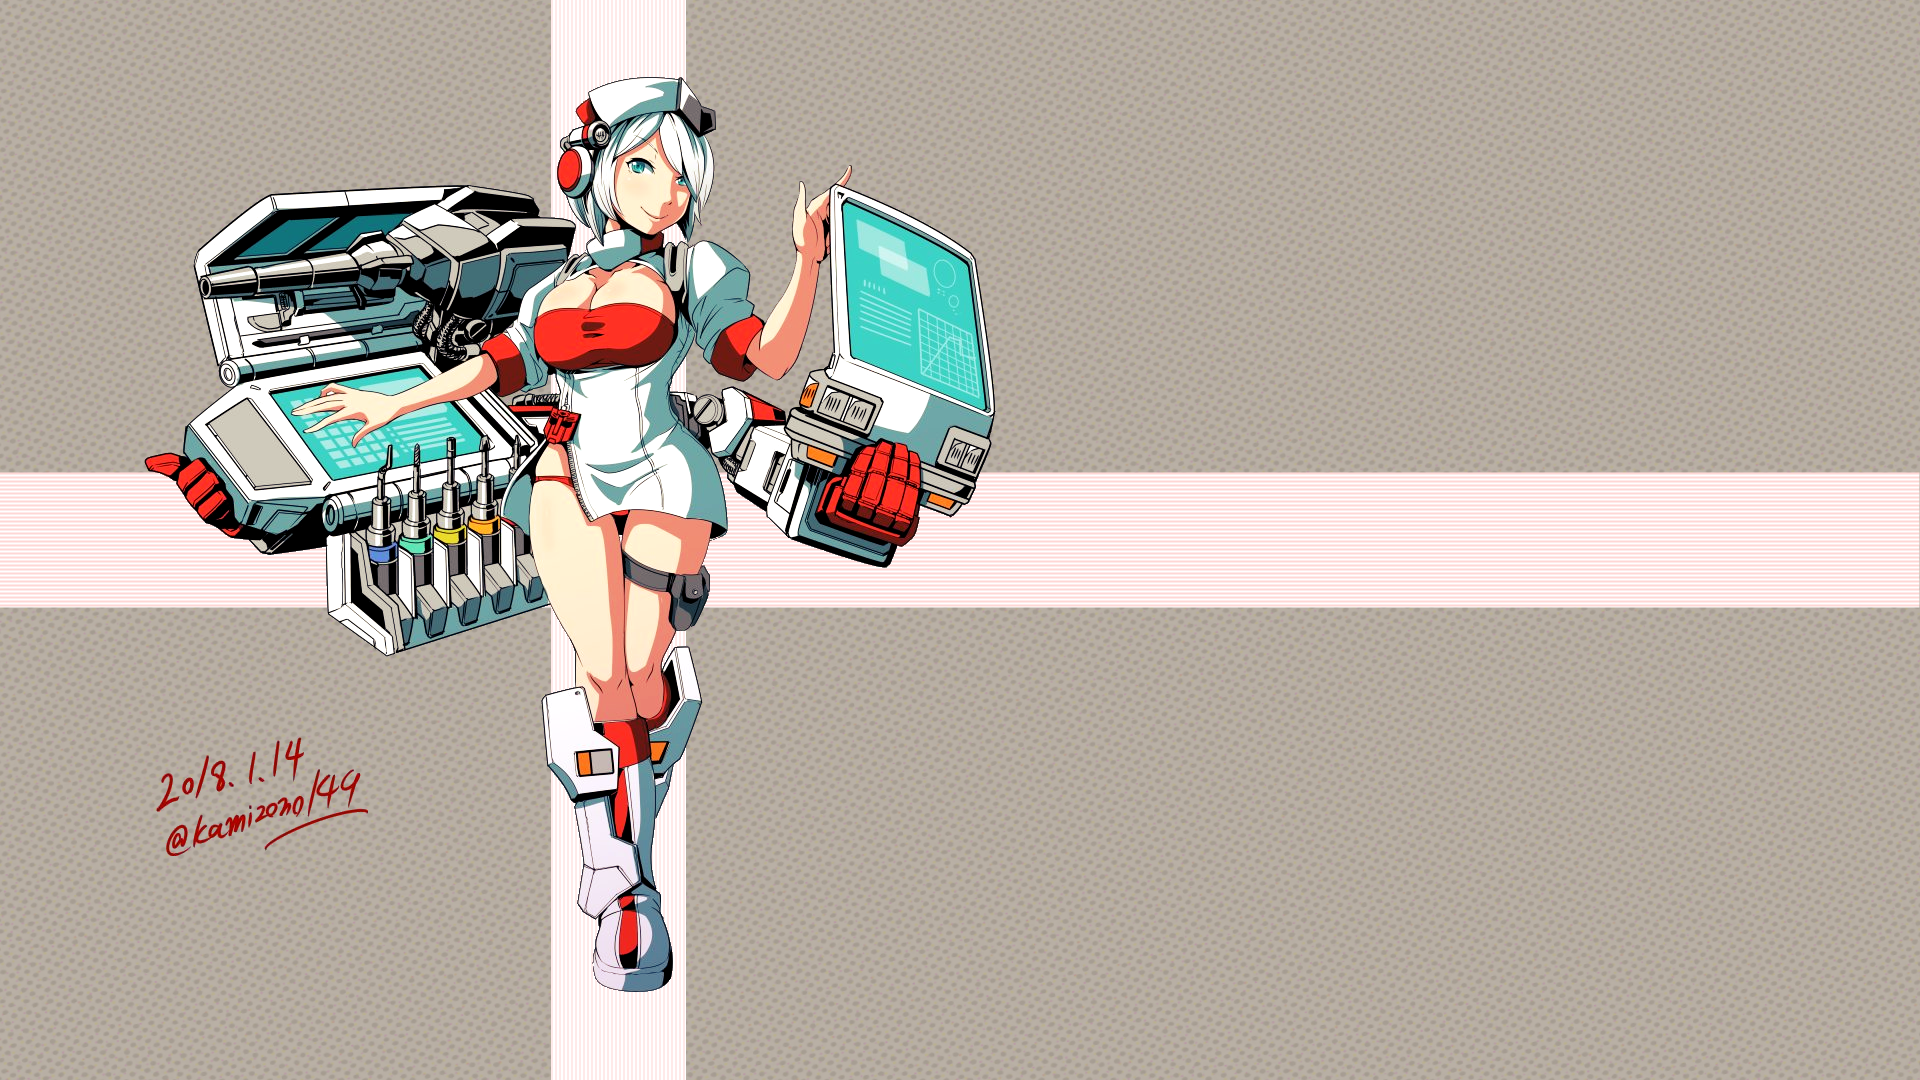 Anime 1920x1080 Transformers Ratchet (Transformers) Autobots blue eyes white hair cleavage Four Arms nurse outfit medicine hat red shirt weapon cannons robot boots steel mecha girls panties the gap thighs thighs together knee-high boots red panties red lingerie short hair bangs underwear cartoon reimagined humanized human android anime girls screens tight clothing red tops headphones cross halftone pattern vehicle bright simple background